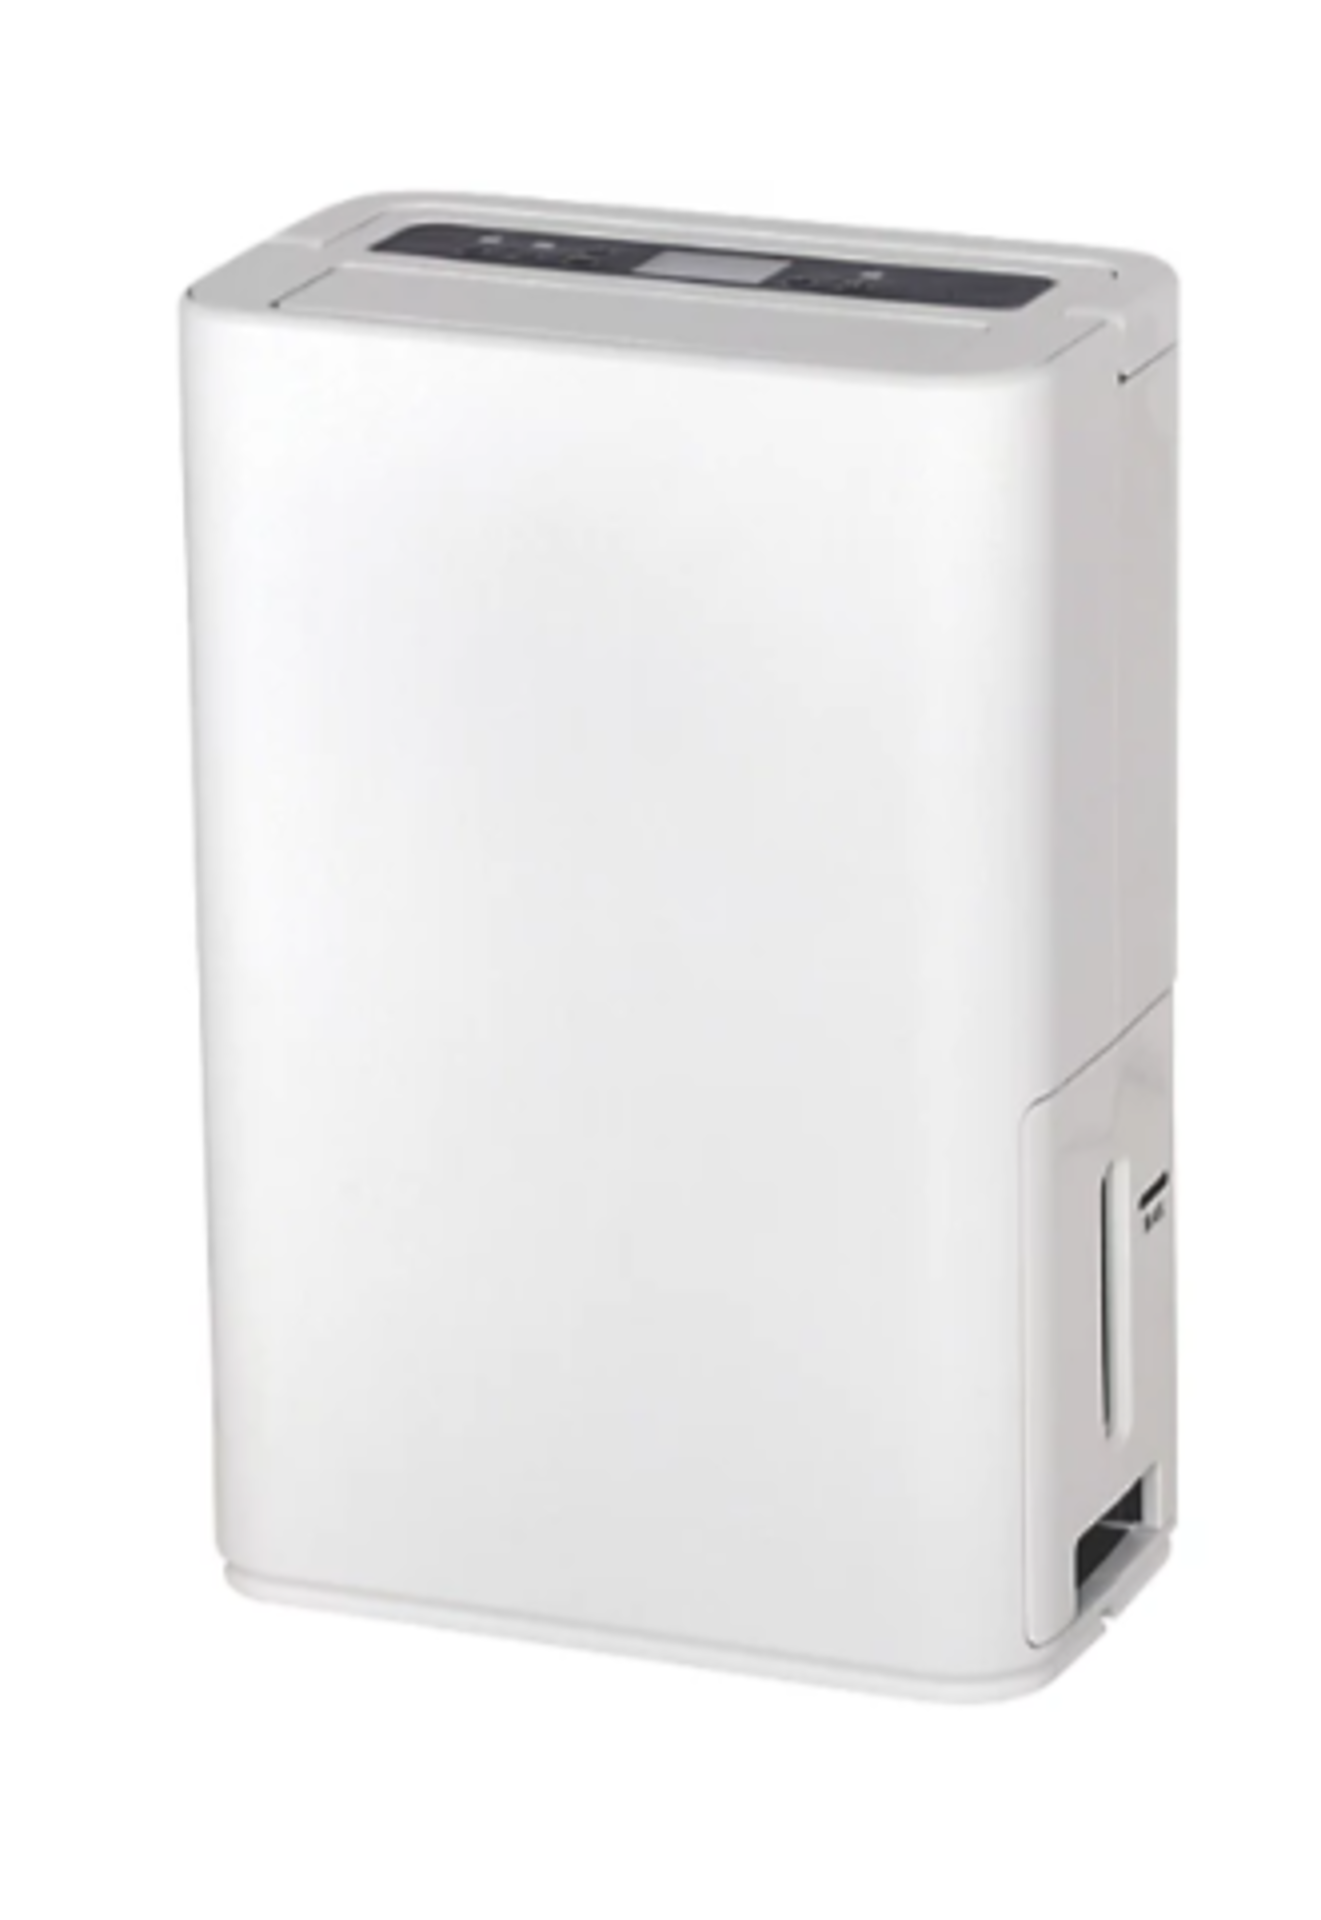 Boxed Blyss 16L Dehumidifier. RRP £190. This Blyss Excellence 16L Dehumidifier is ideal for removing - Image 2 of 2